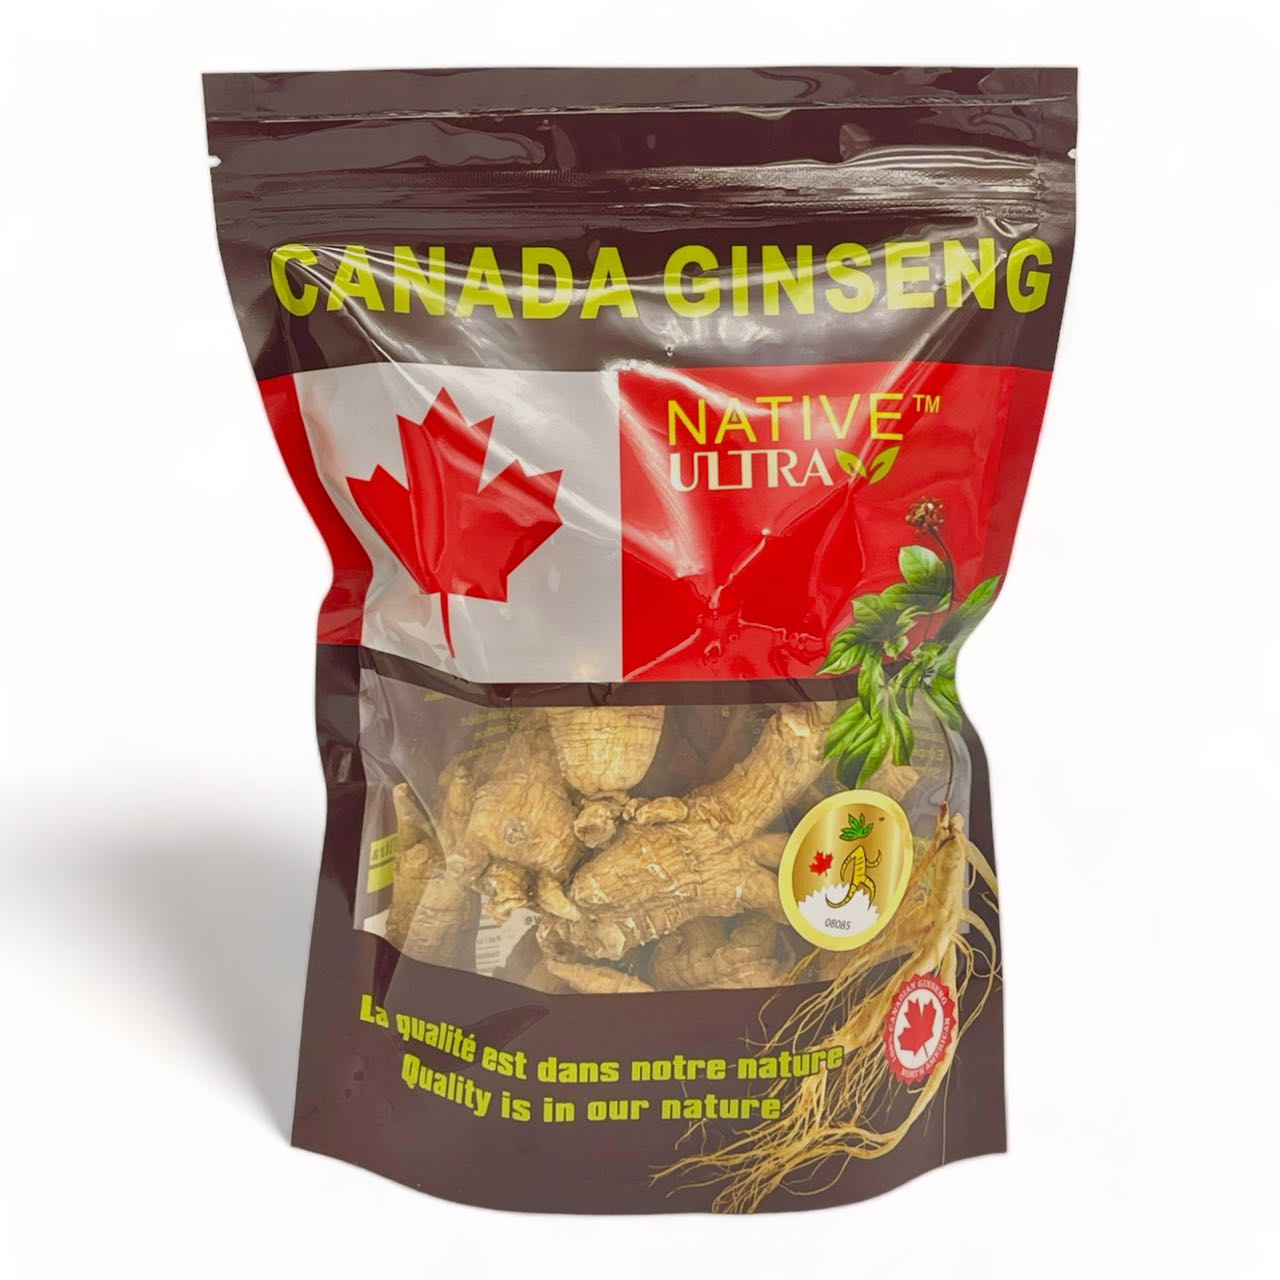 "NATIVE ULTRA" 6-Year Selected Canadian Ginseng Whole Roots, 454g/bag